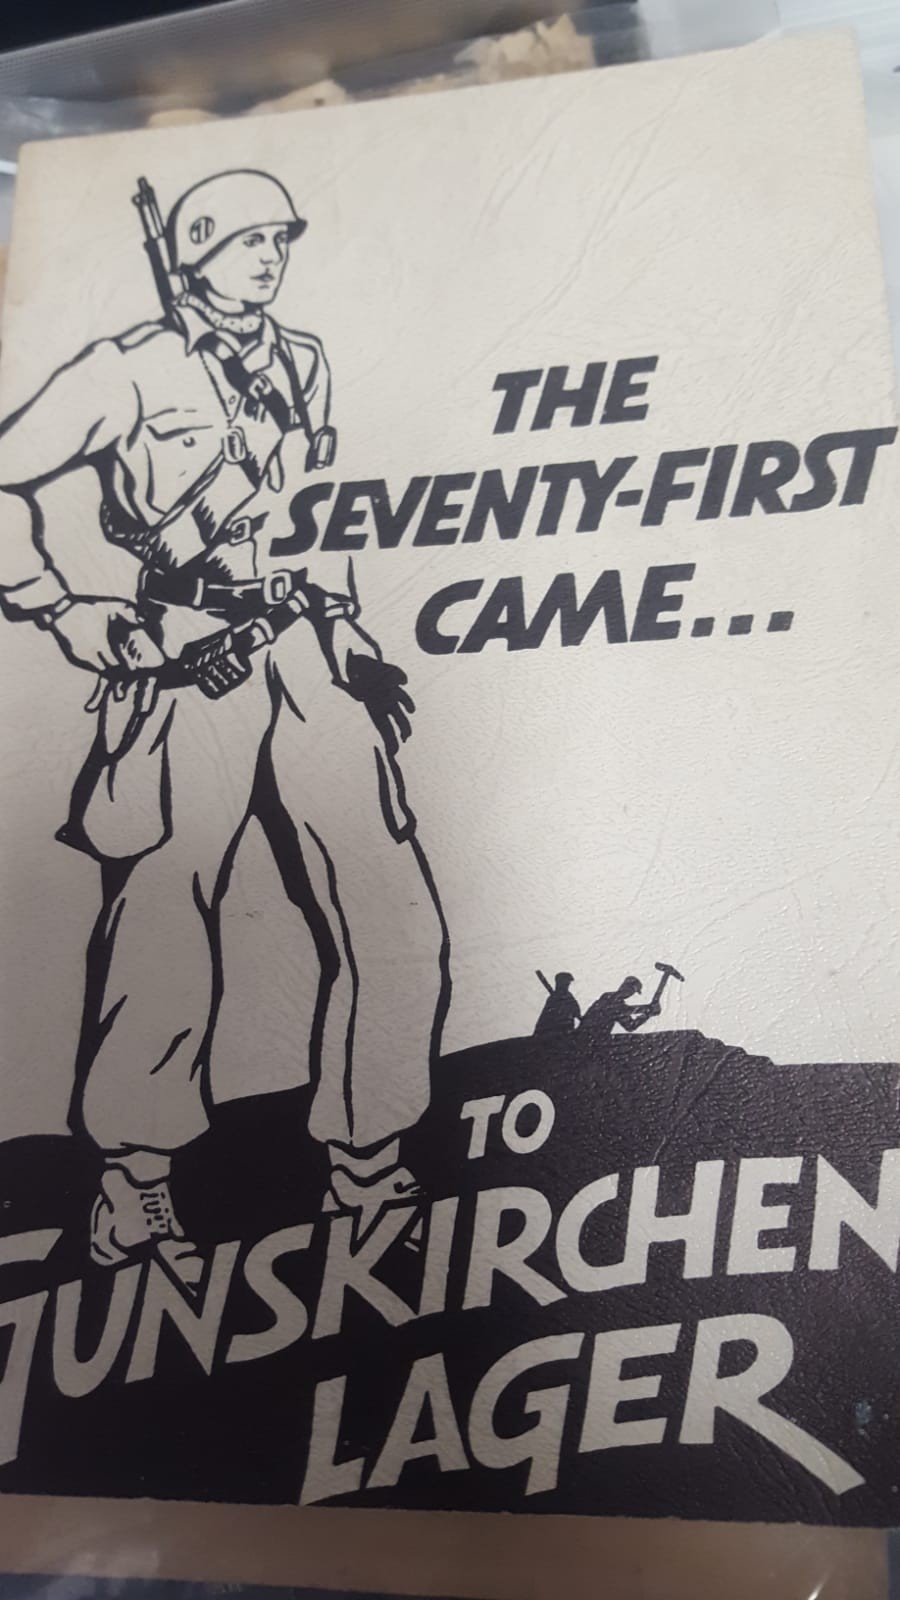 The Seventy-first came-- to Gunskirchen Lager 1945